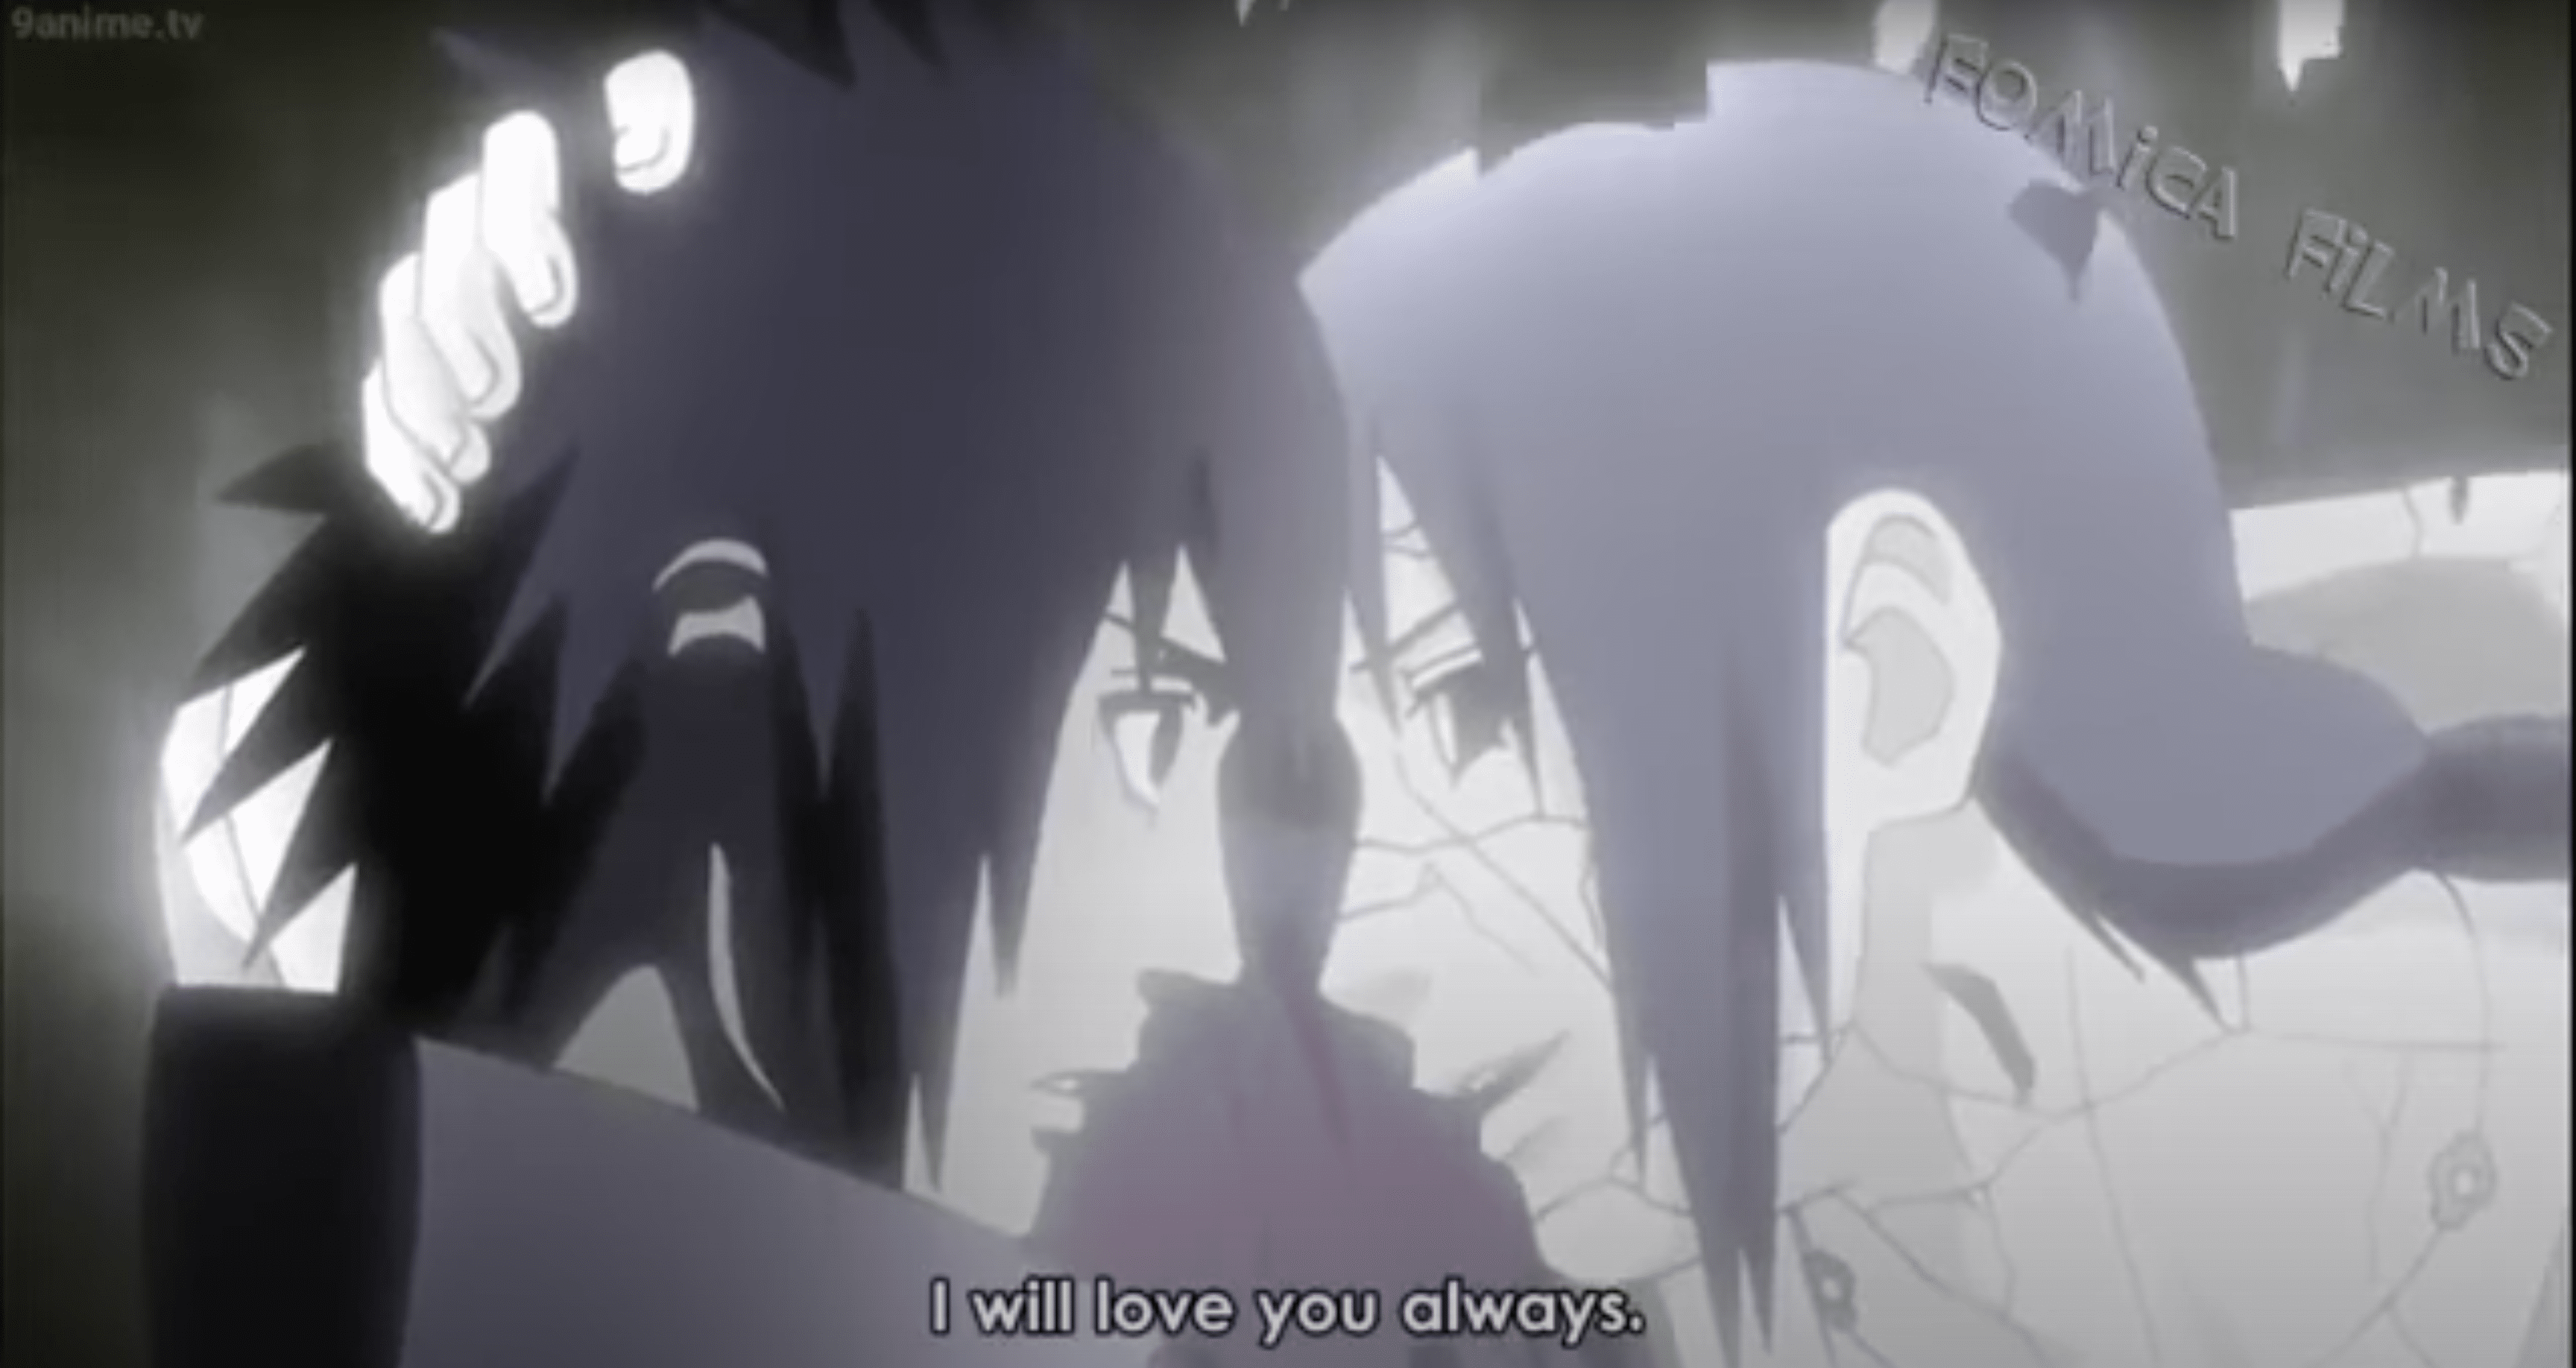 https://bram-adams.ghost.io/content/images/2023/02/itachi-ill-love-you-always.png